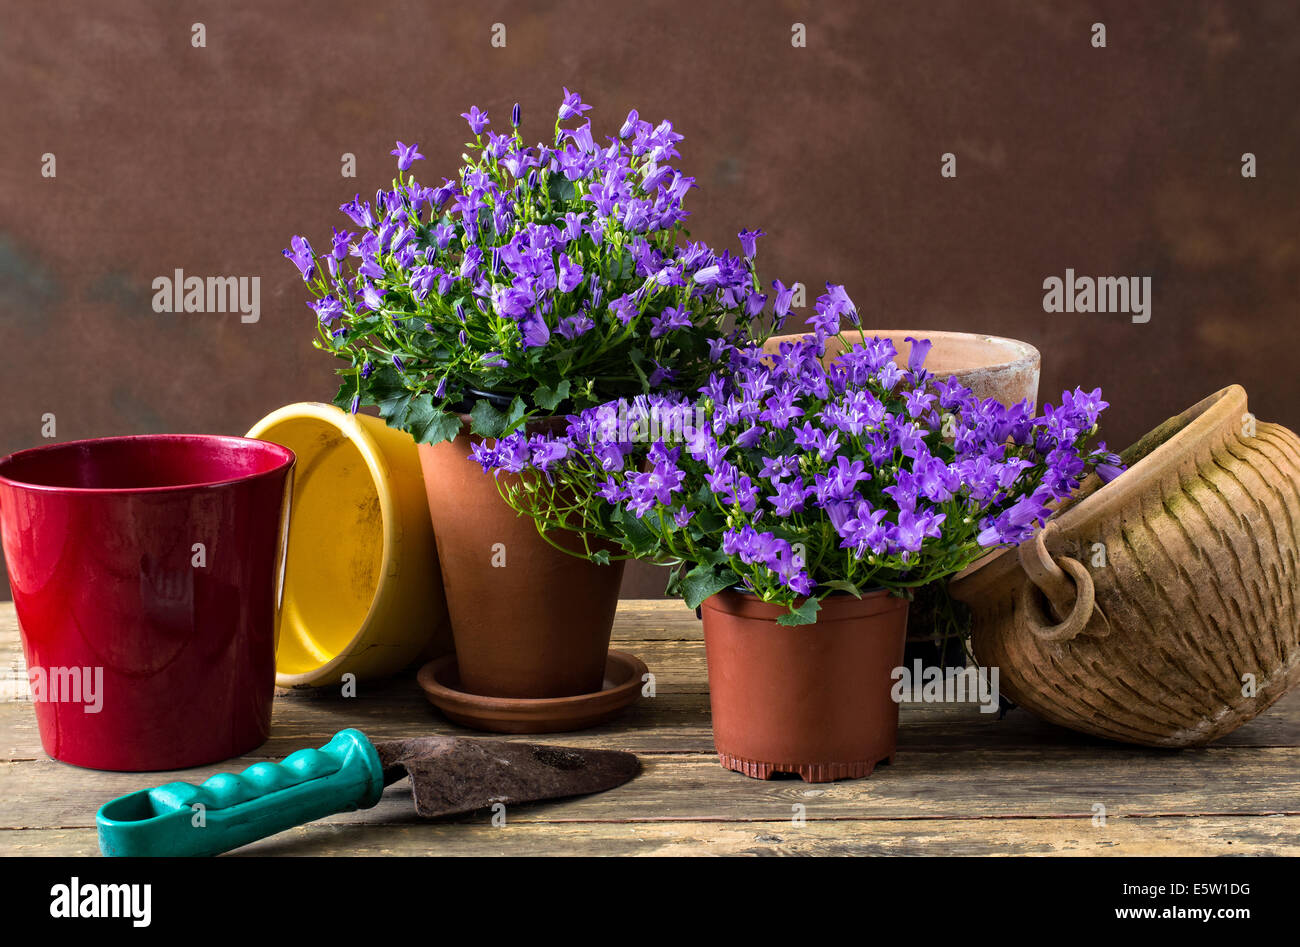 Still life of garden flower Campanula plants with clay pots Stock Photo